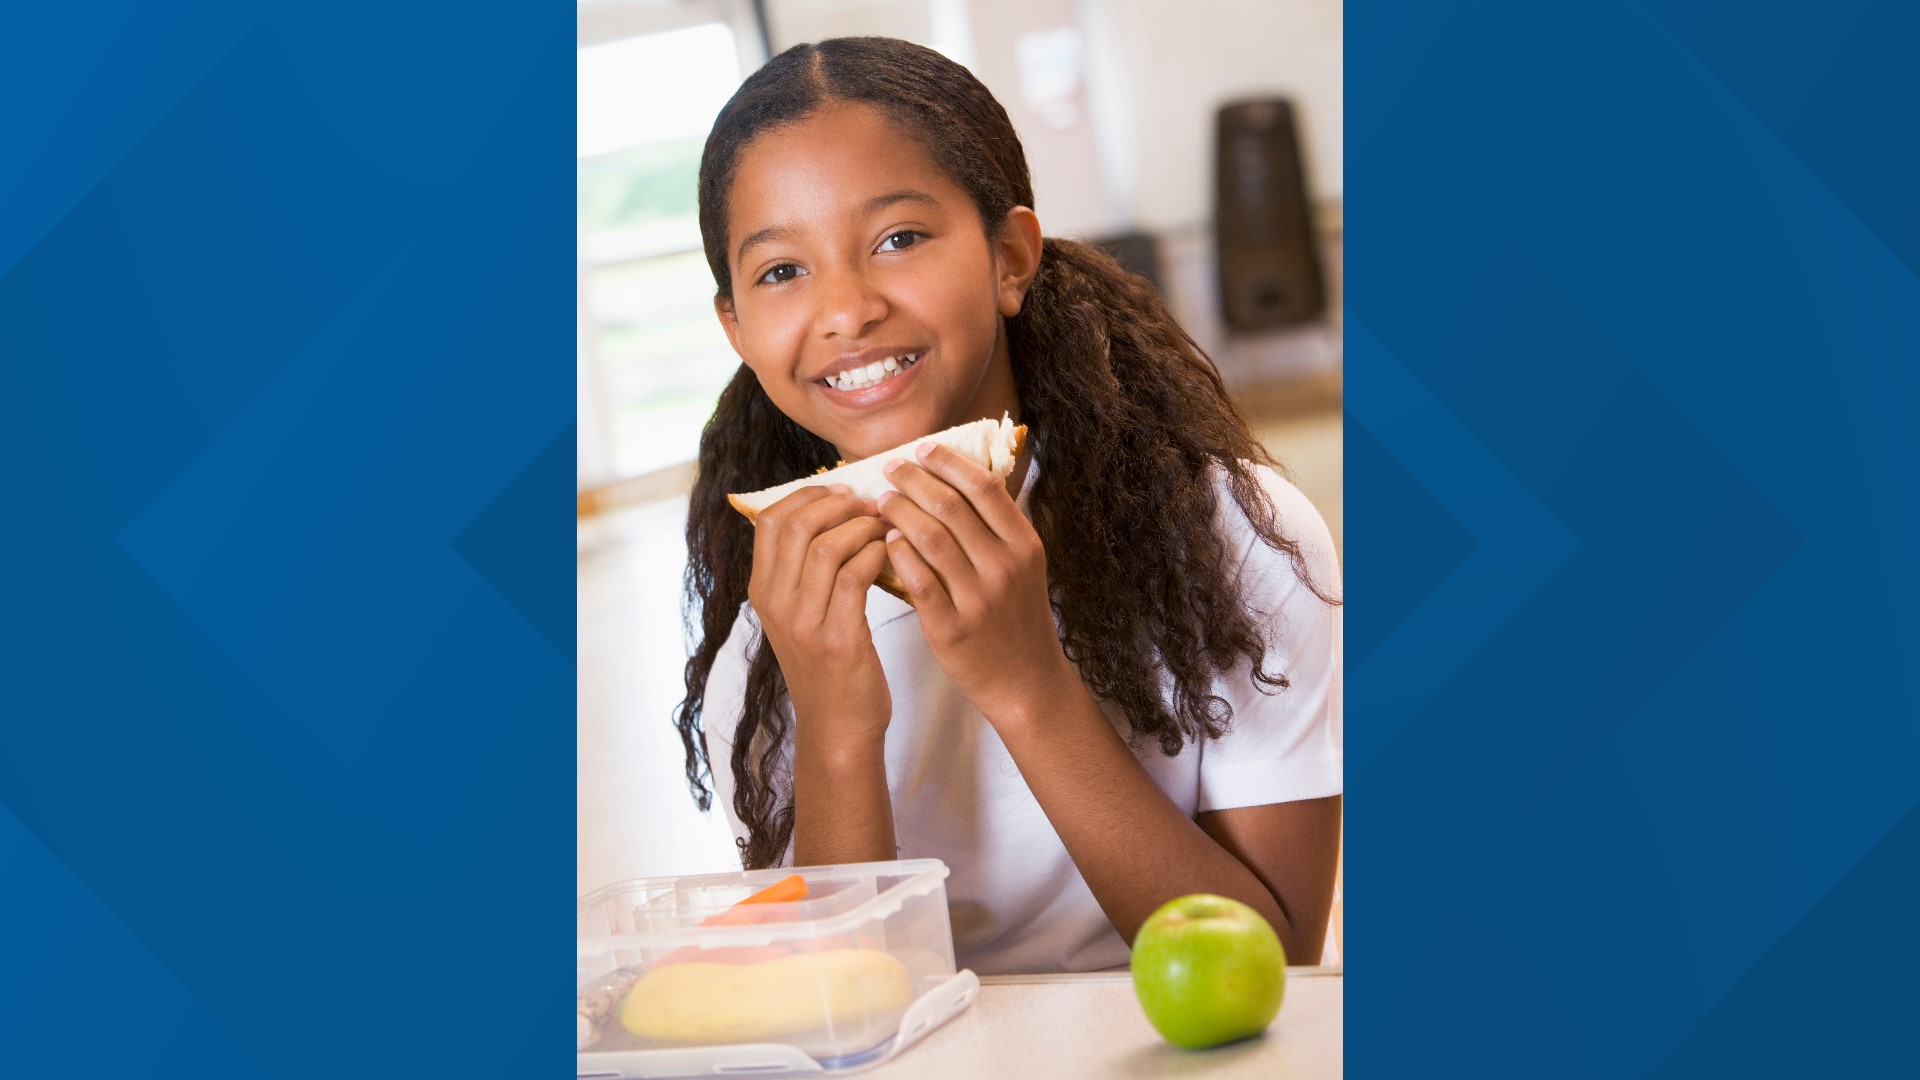 Navigating nutrition during COVID-19: Ideas for school lunches at home